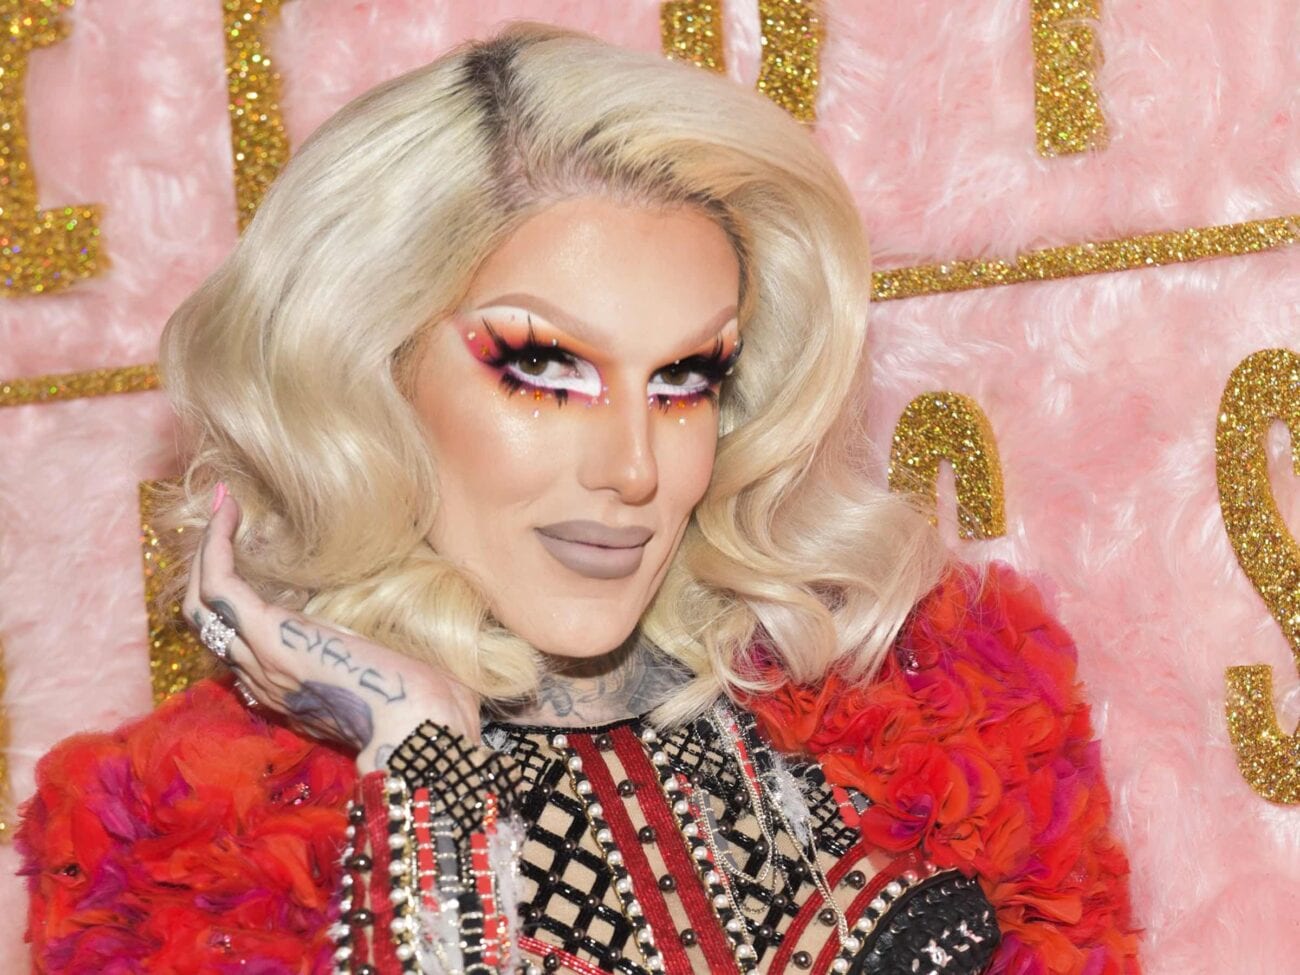 If anything has been made more clear, it’s that Jeffree Star brings all of the drama. Is it time to clean house? Here's what we know.